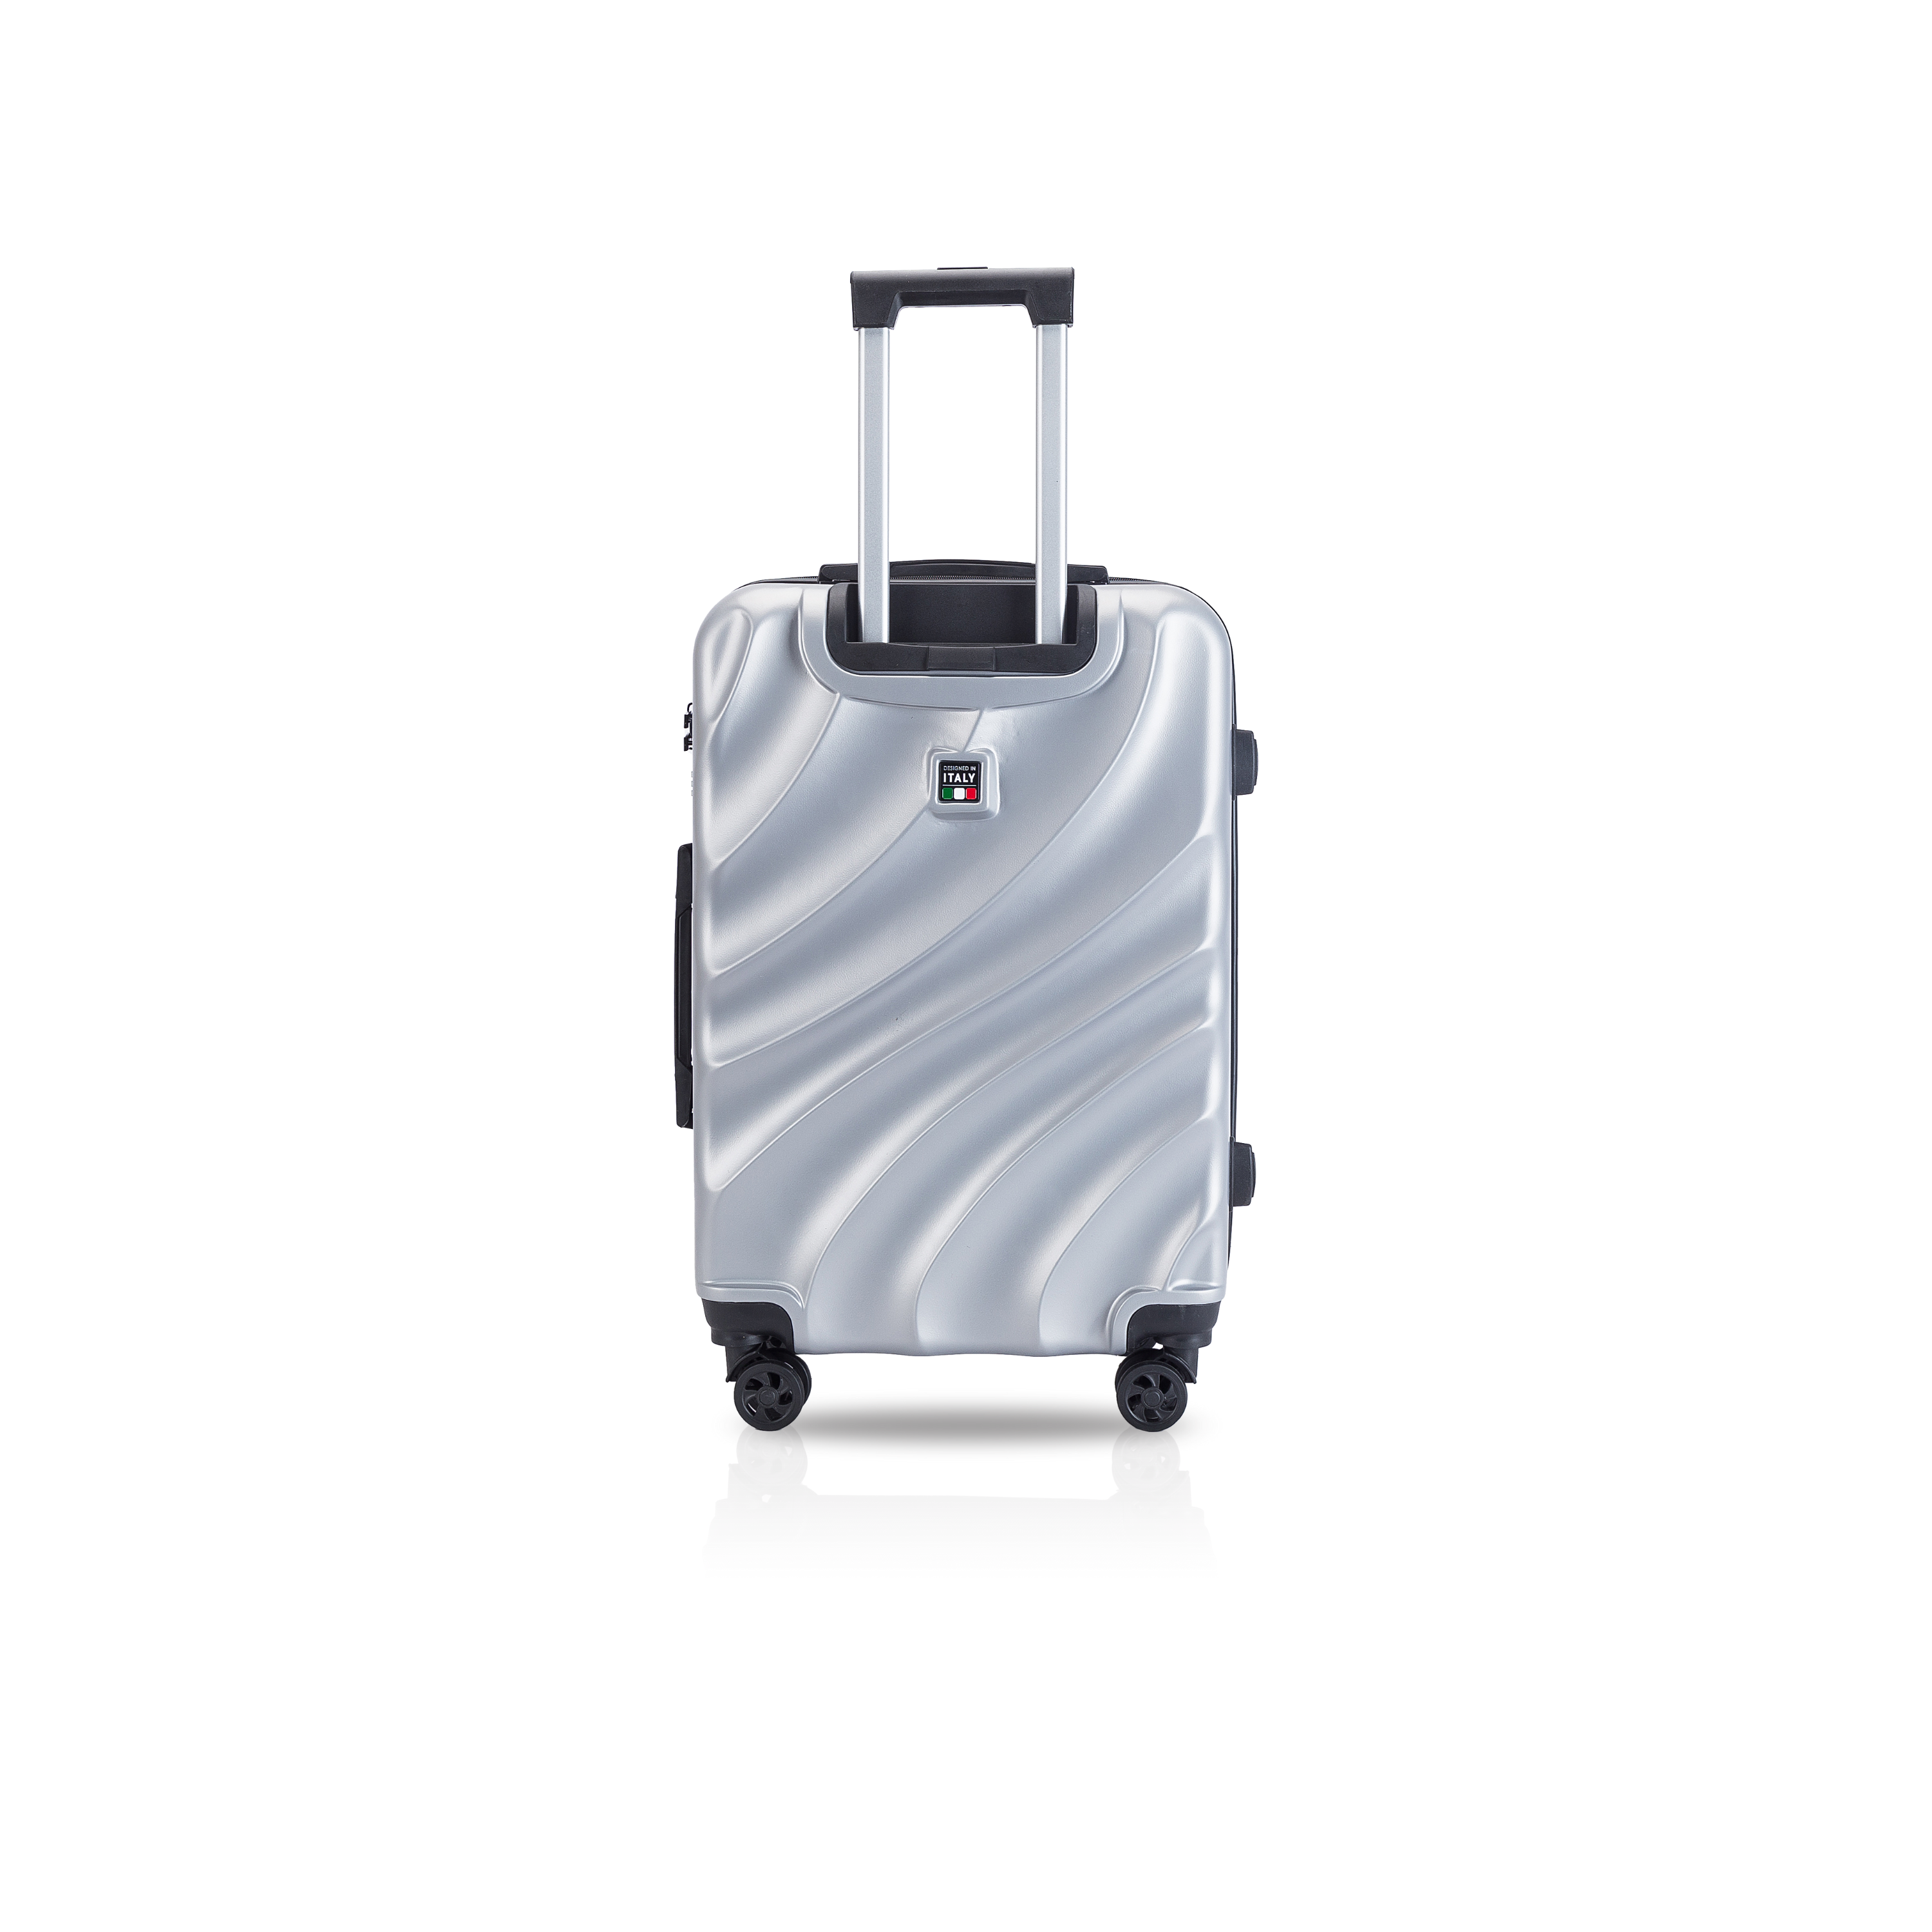 TUCCI CREMOSA ABS 24" Luggage Travel